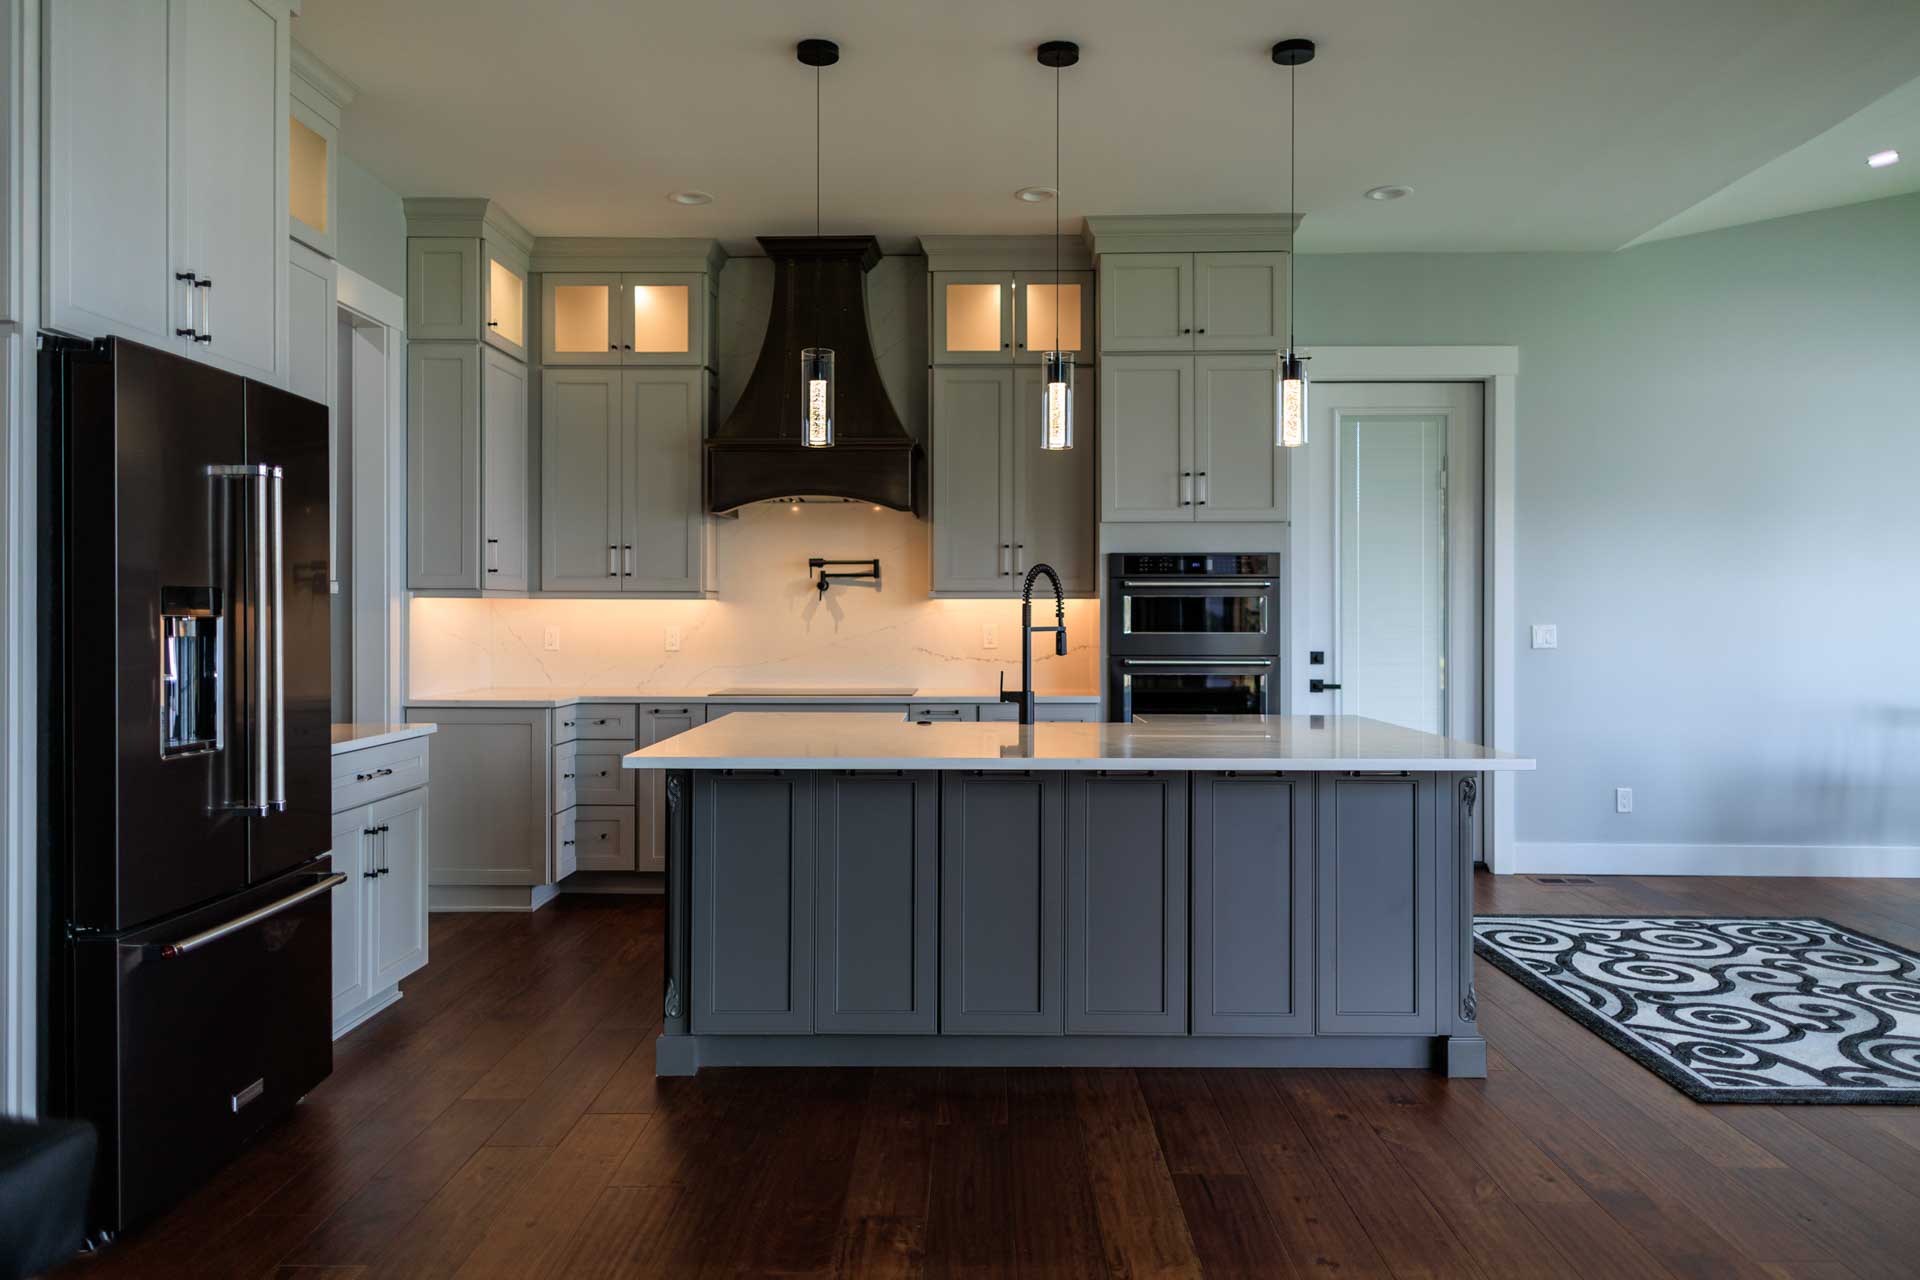 Woodline Building Company Modern Lakefront Lake Nepessing Lapeer, Michigan Kitchen with Modern Pendant Lights